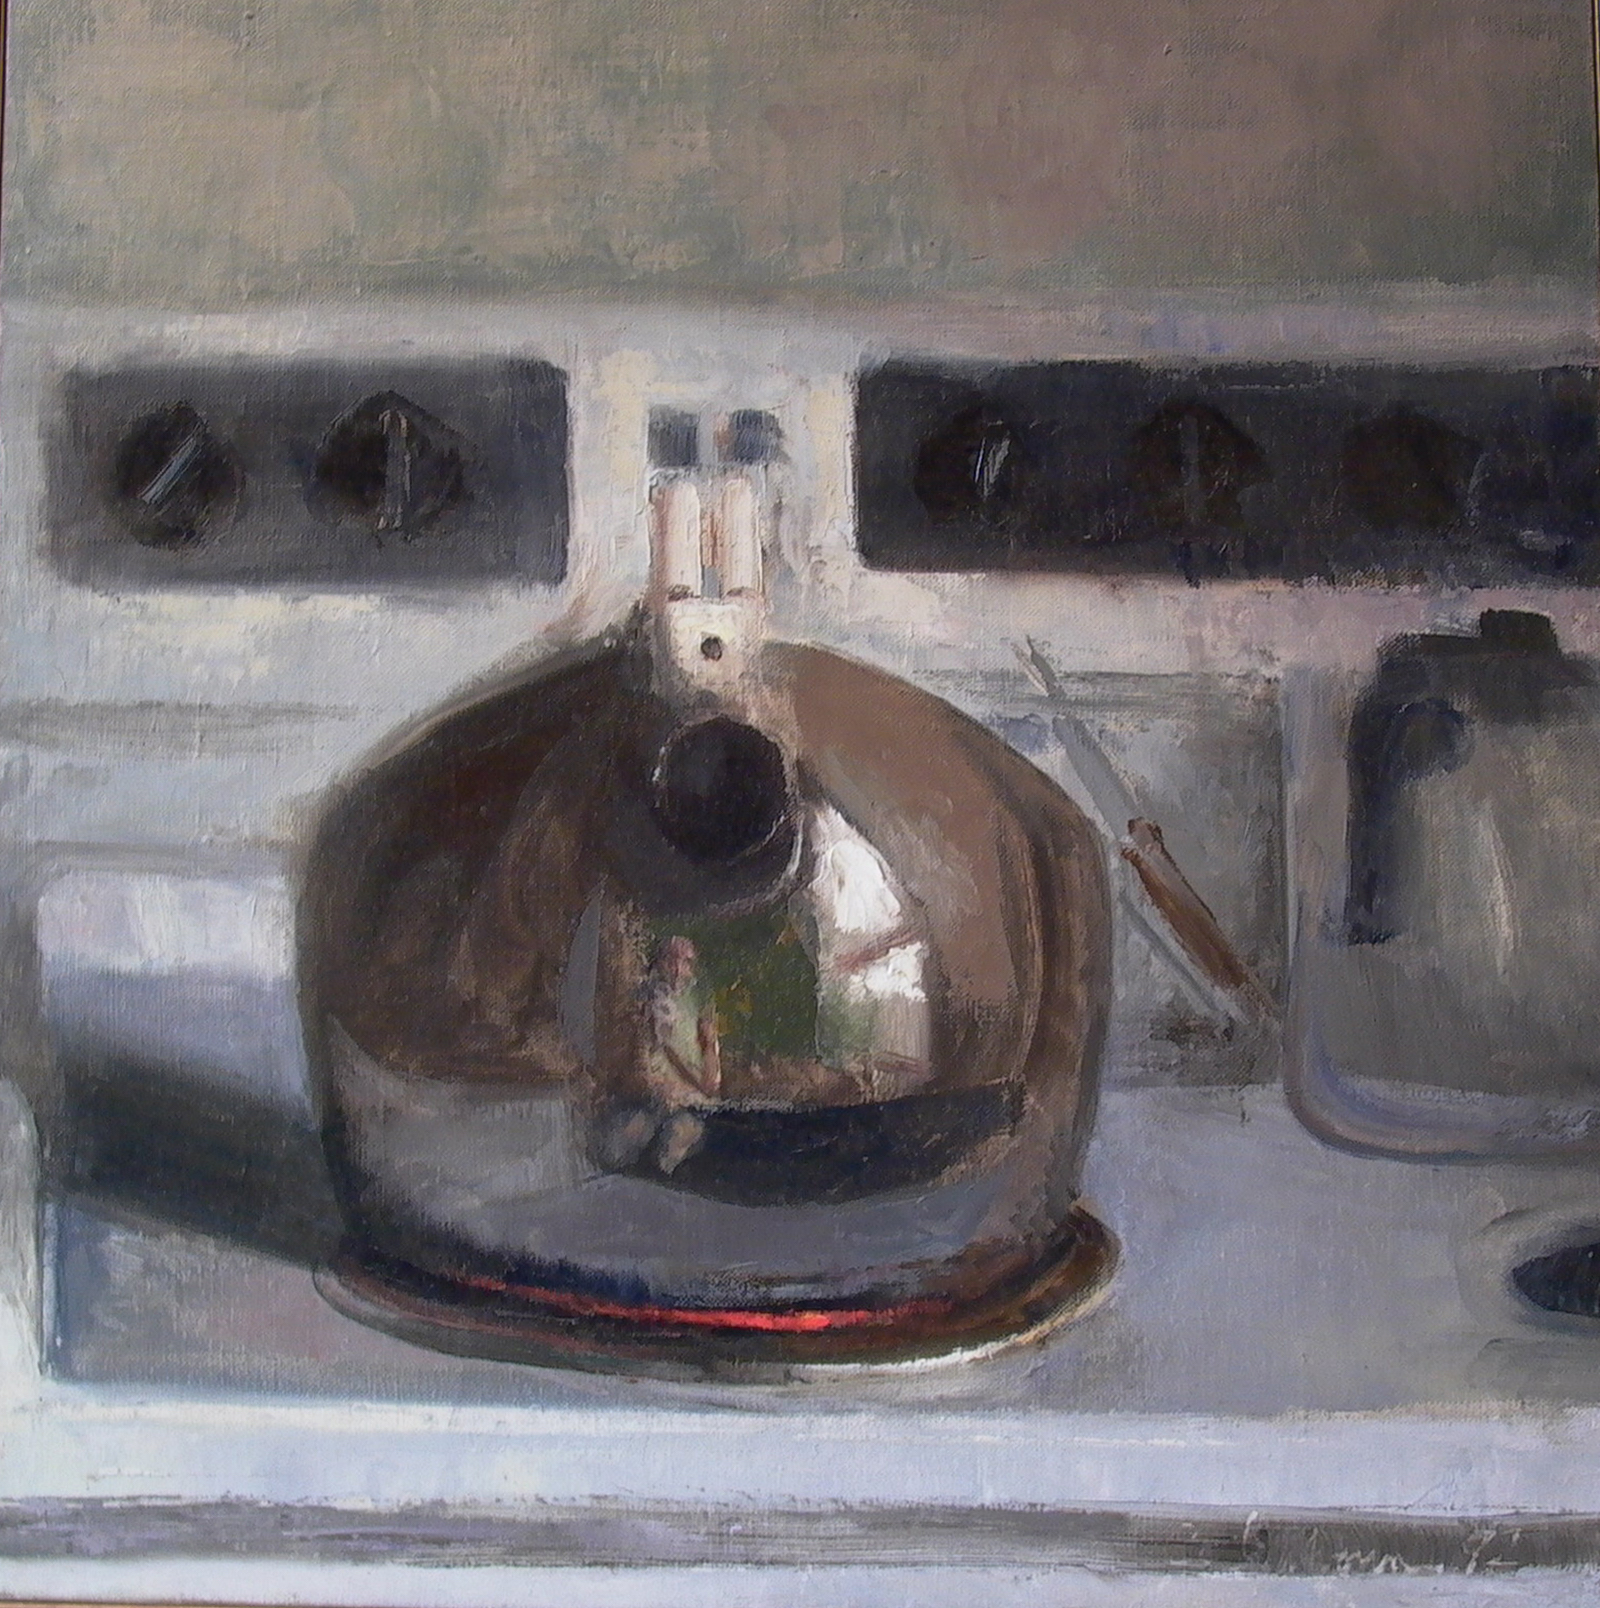 Kettle, oil on linen, 18 x 18 inches, 1993.